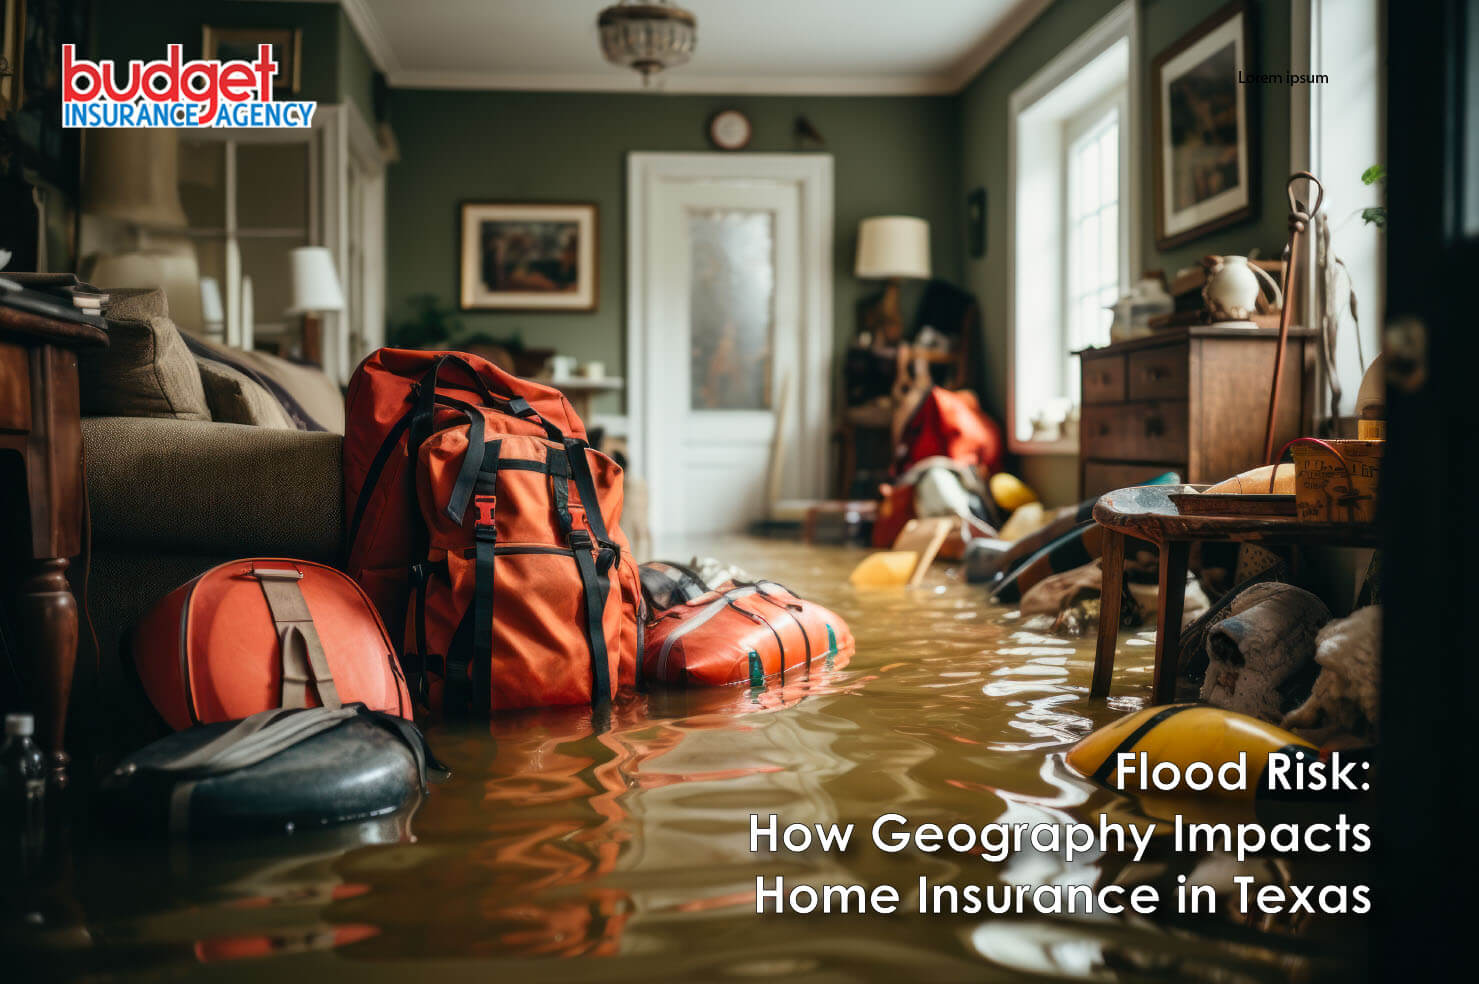 Flood Risk: How Geography Impacts Home Insurance in Texas